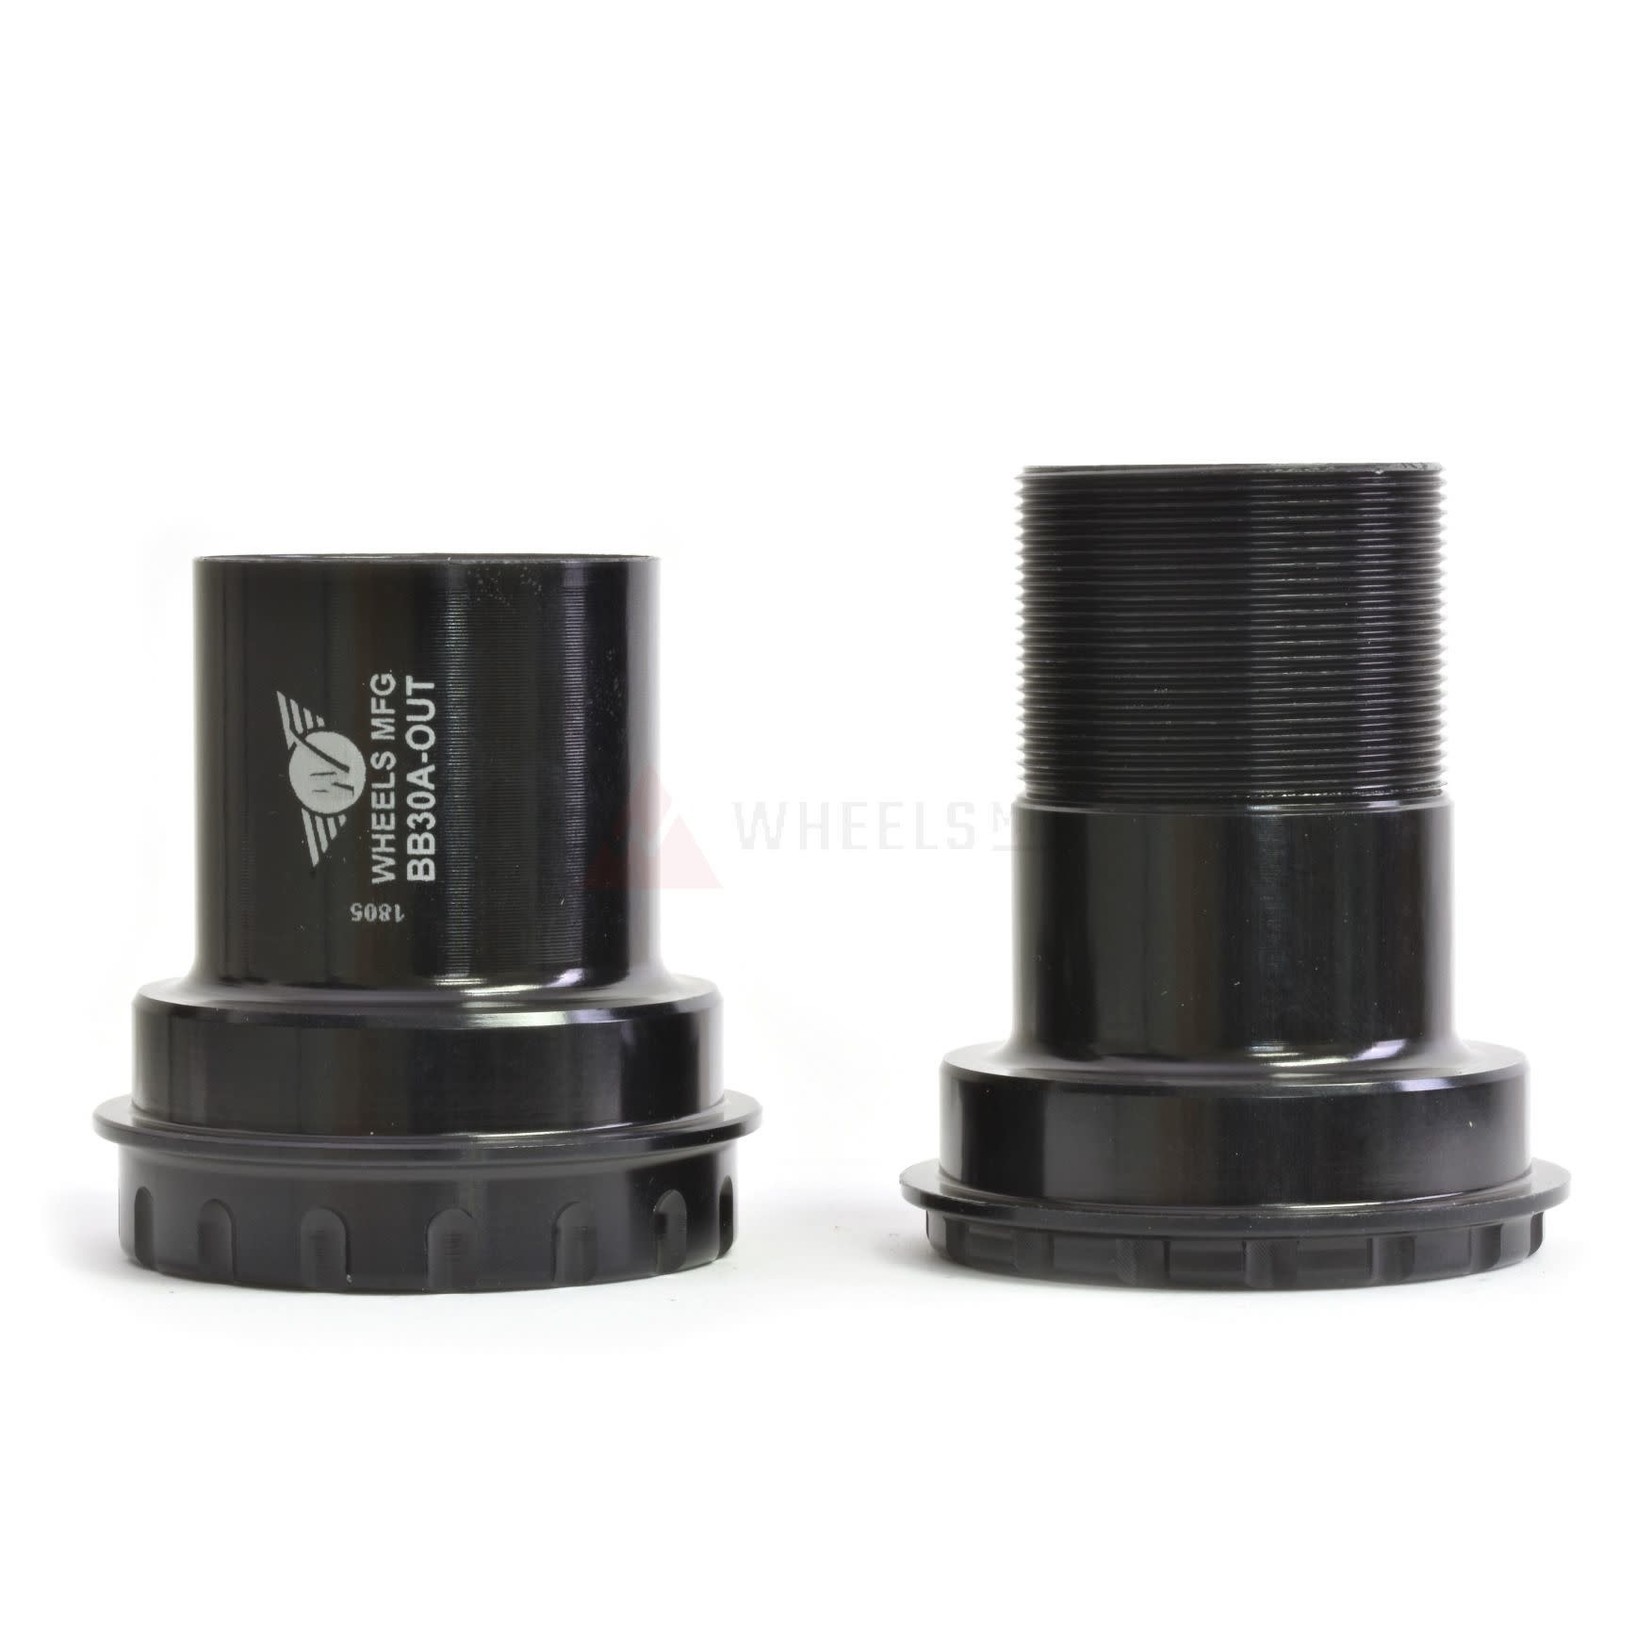 Wheels Manufacturing Wheels Mfg Bottom Bracket - BB30A Outboard Angular Contact BB for 22/24mm Cranks (SRAM)